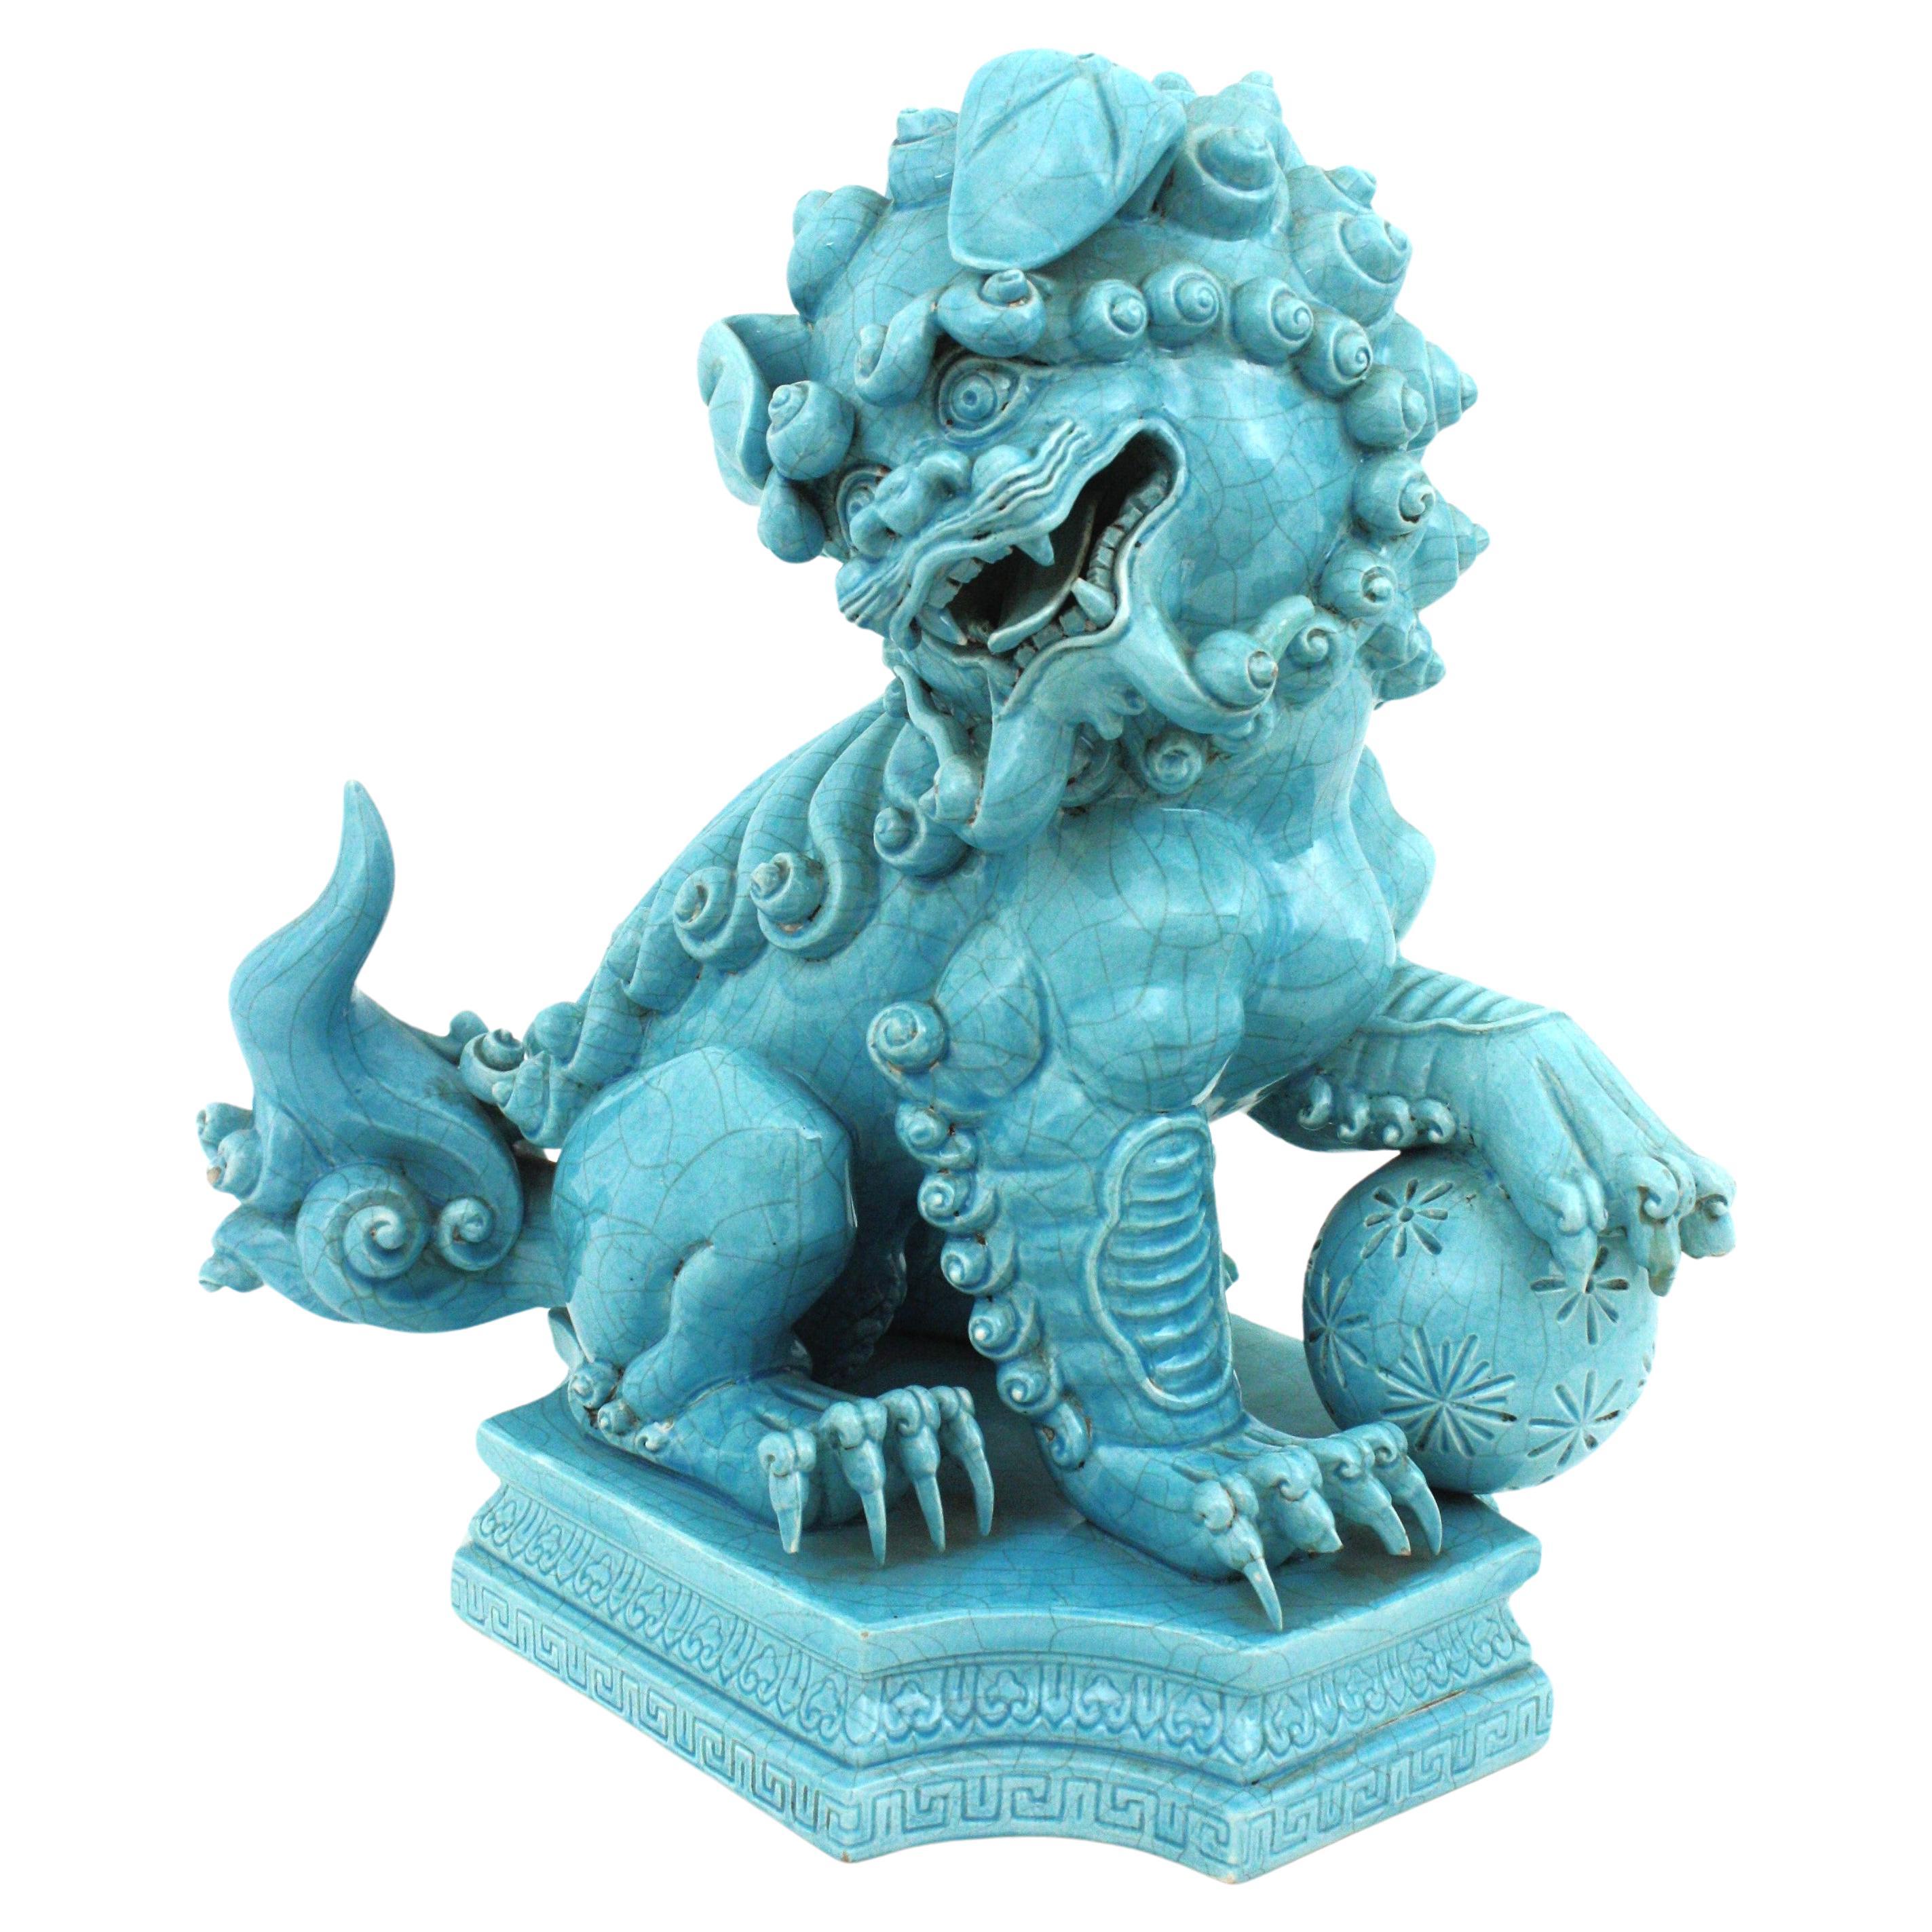 Large Size Male Guardian Lion Foo Dog in Turquoise Blue Glazed Porcelain
Algora Porcelains
Designed from 1920 to 1949.
This is a male guardian lion sculpture, is recognized as it is resting his paw on the ball.
For thousands of years, these majestic